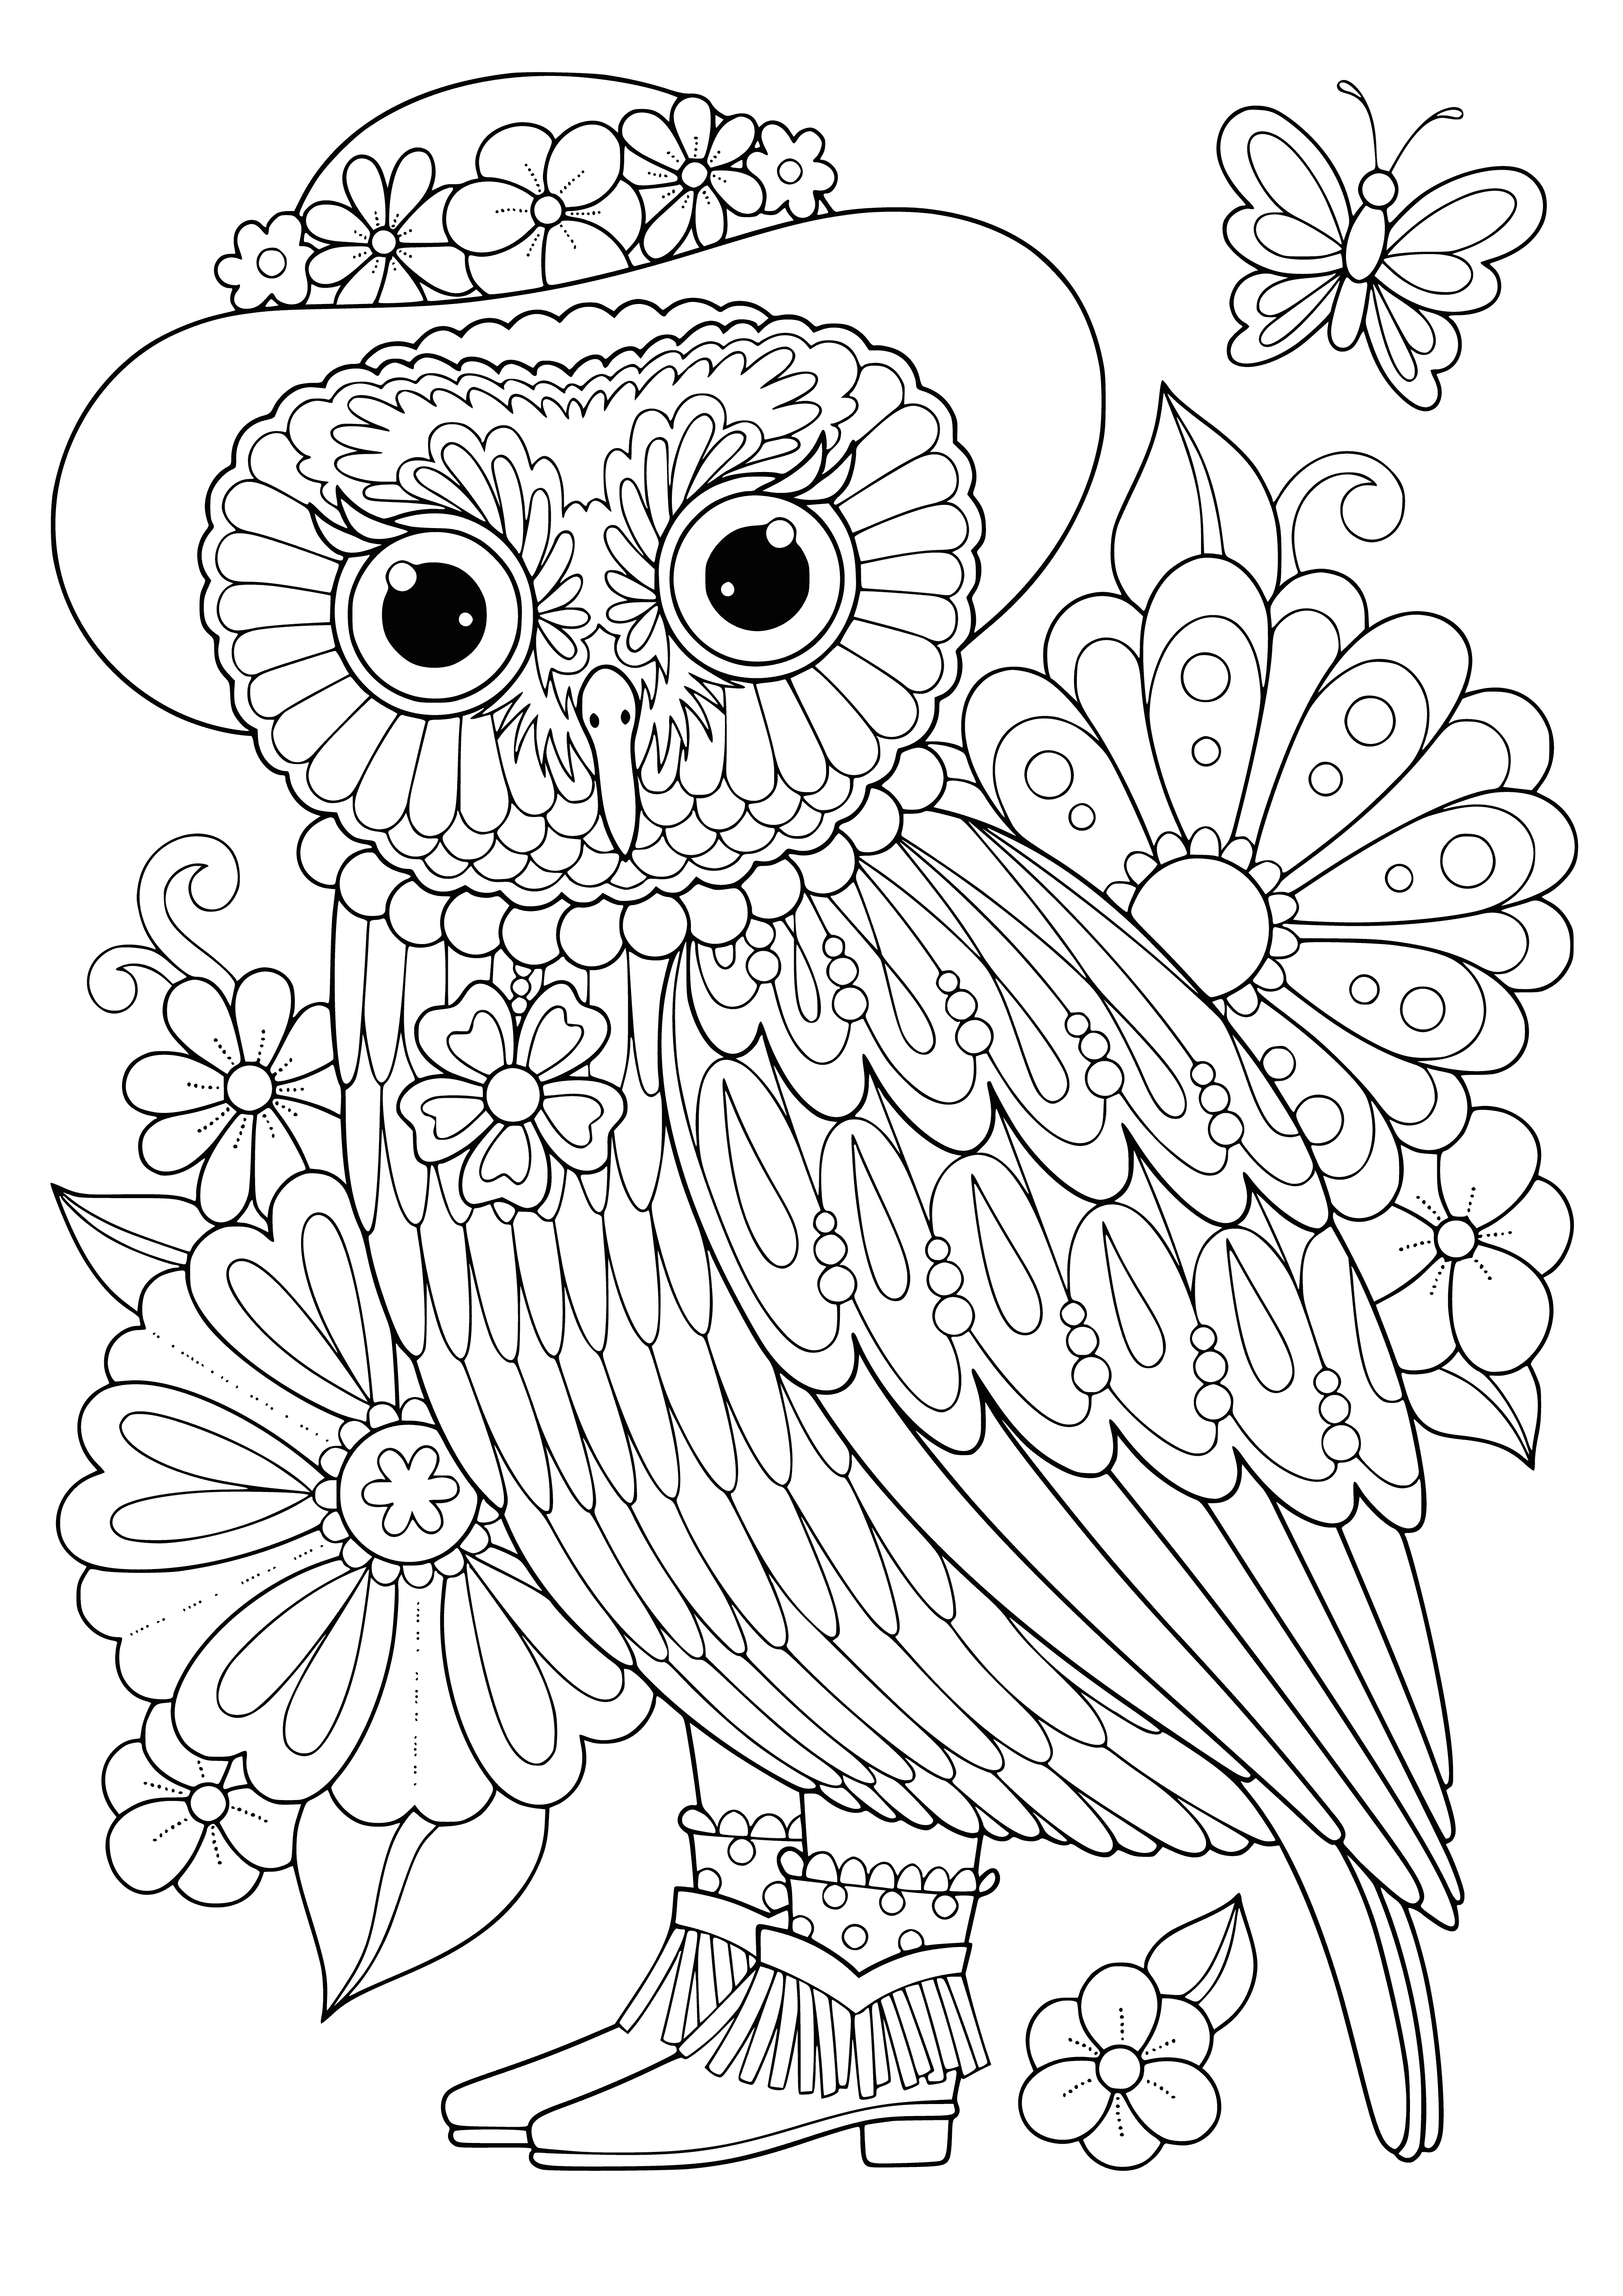 coloring page: Colorful owls in hat & boots standing on a branch - great for adult coloring books! #Owls #Coloring